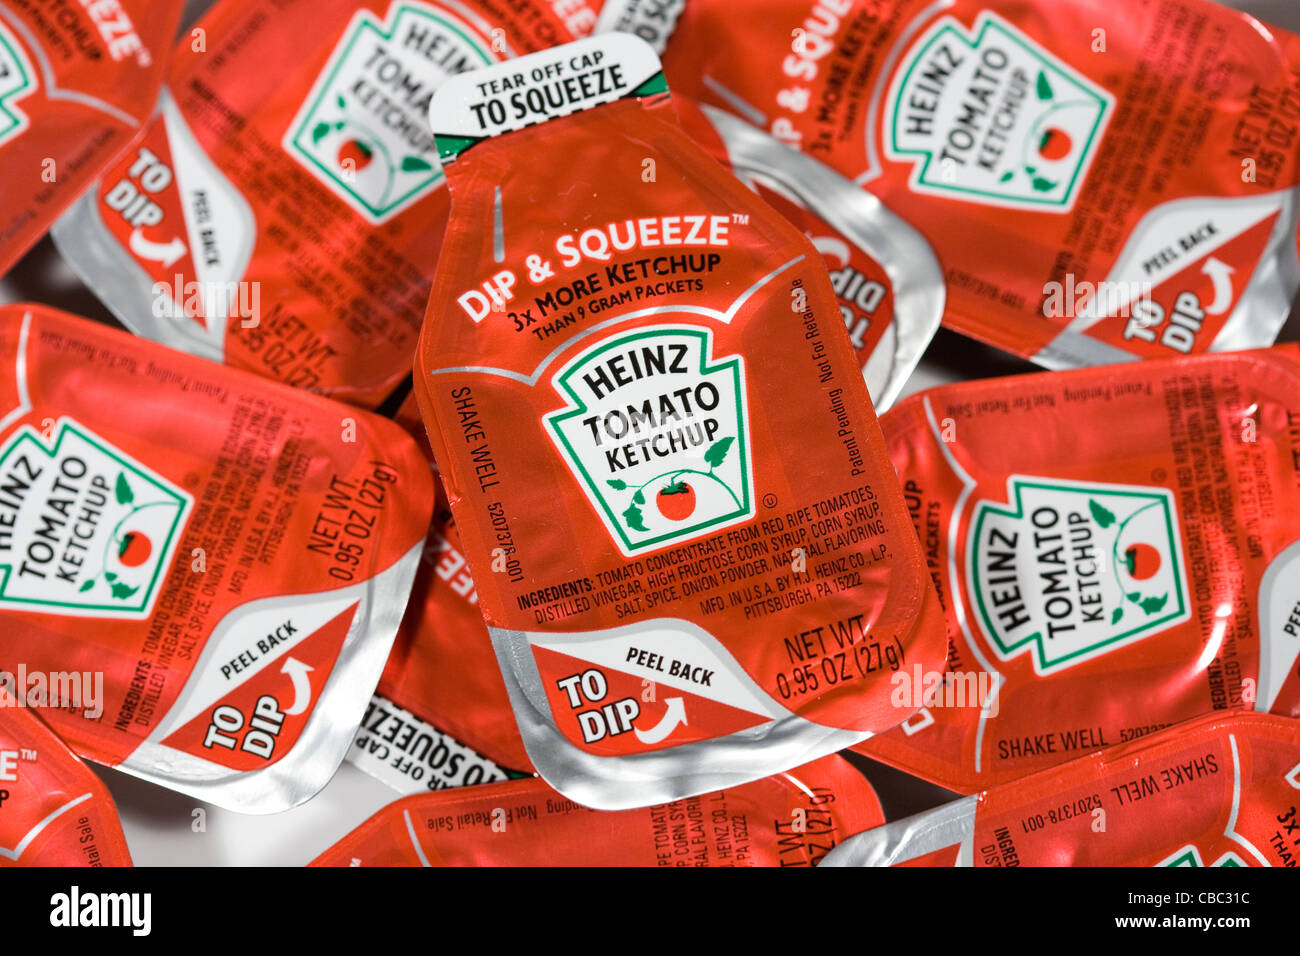 The new style of Heinz Ketchup packets.  Stock Photo